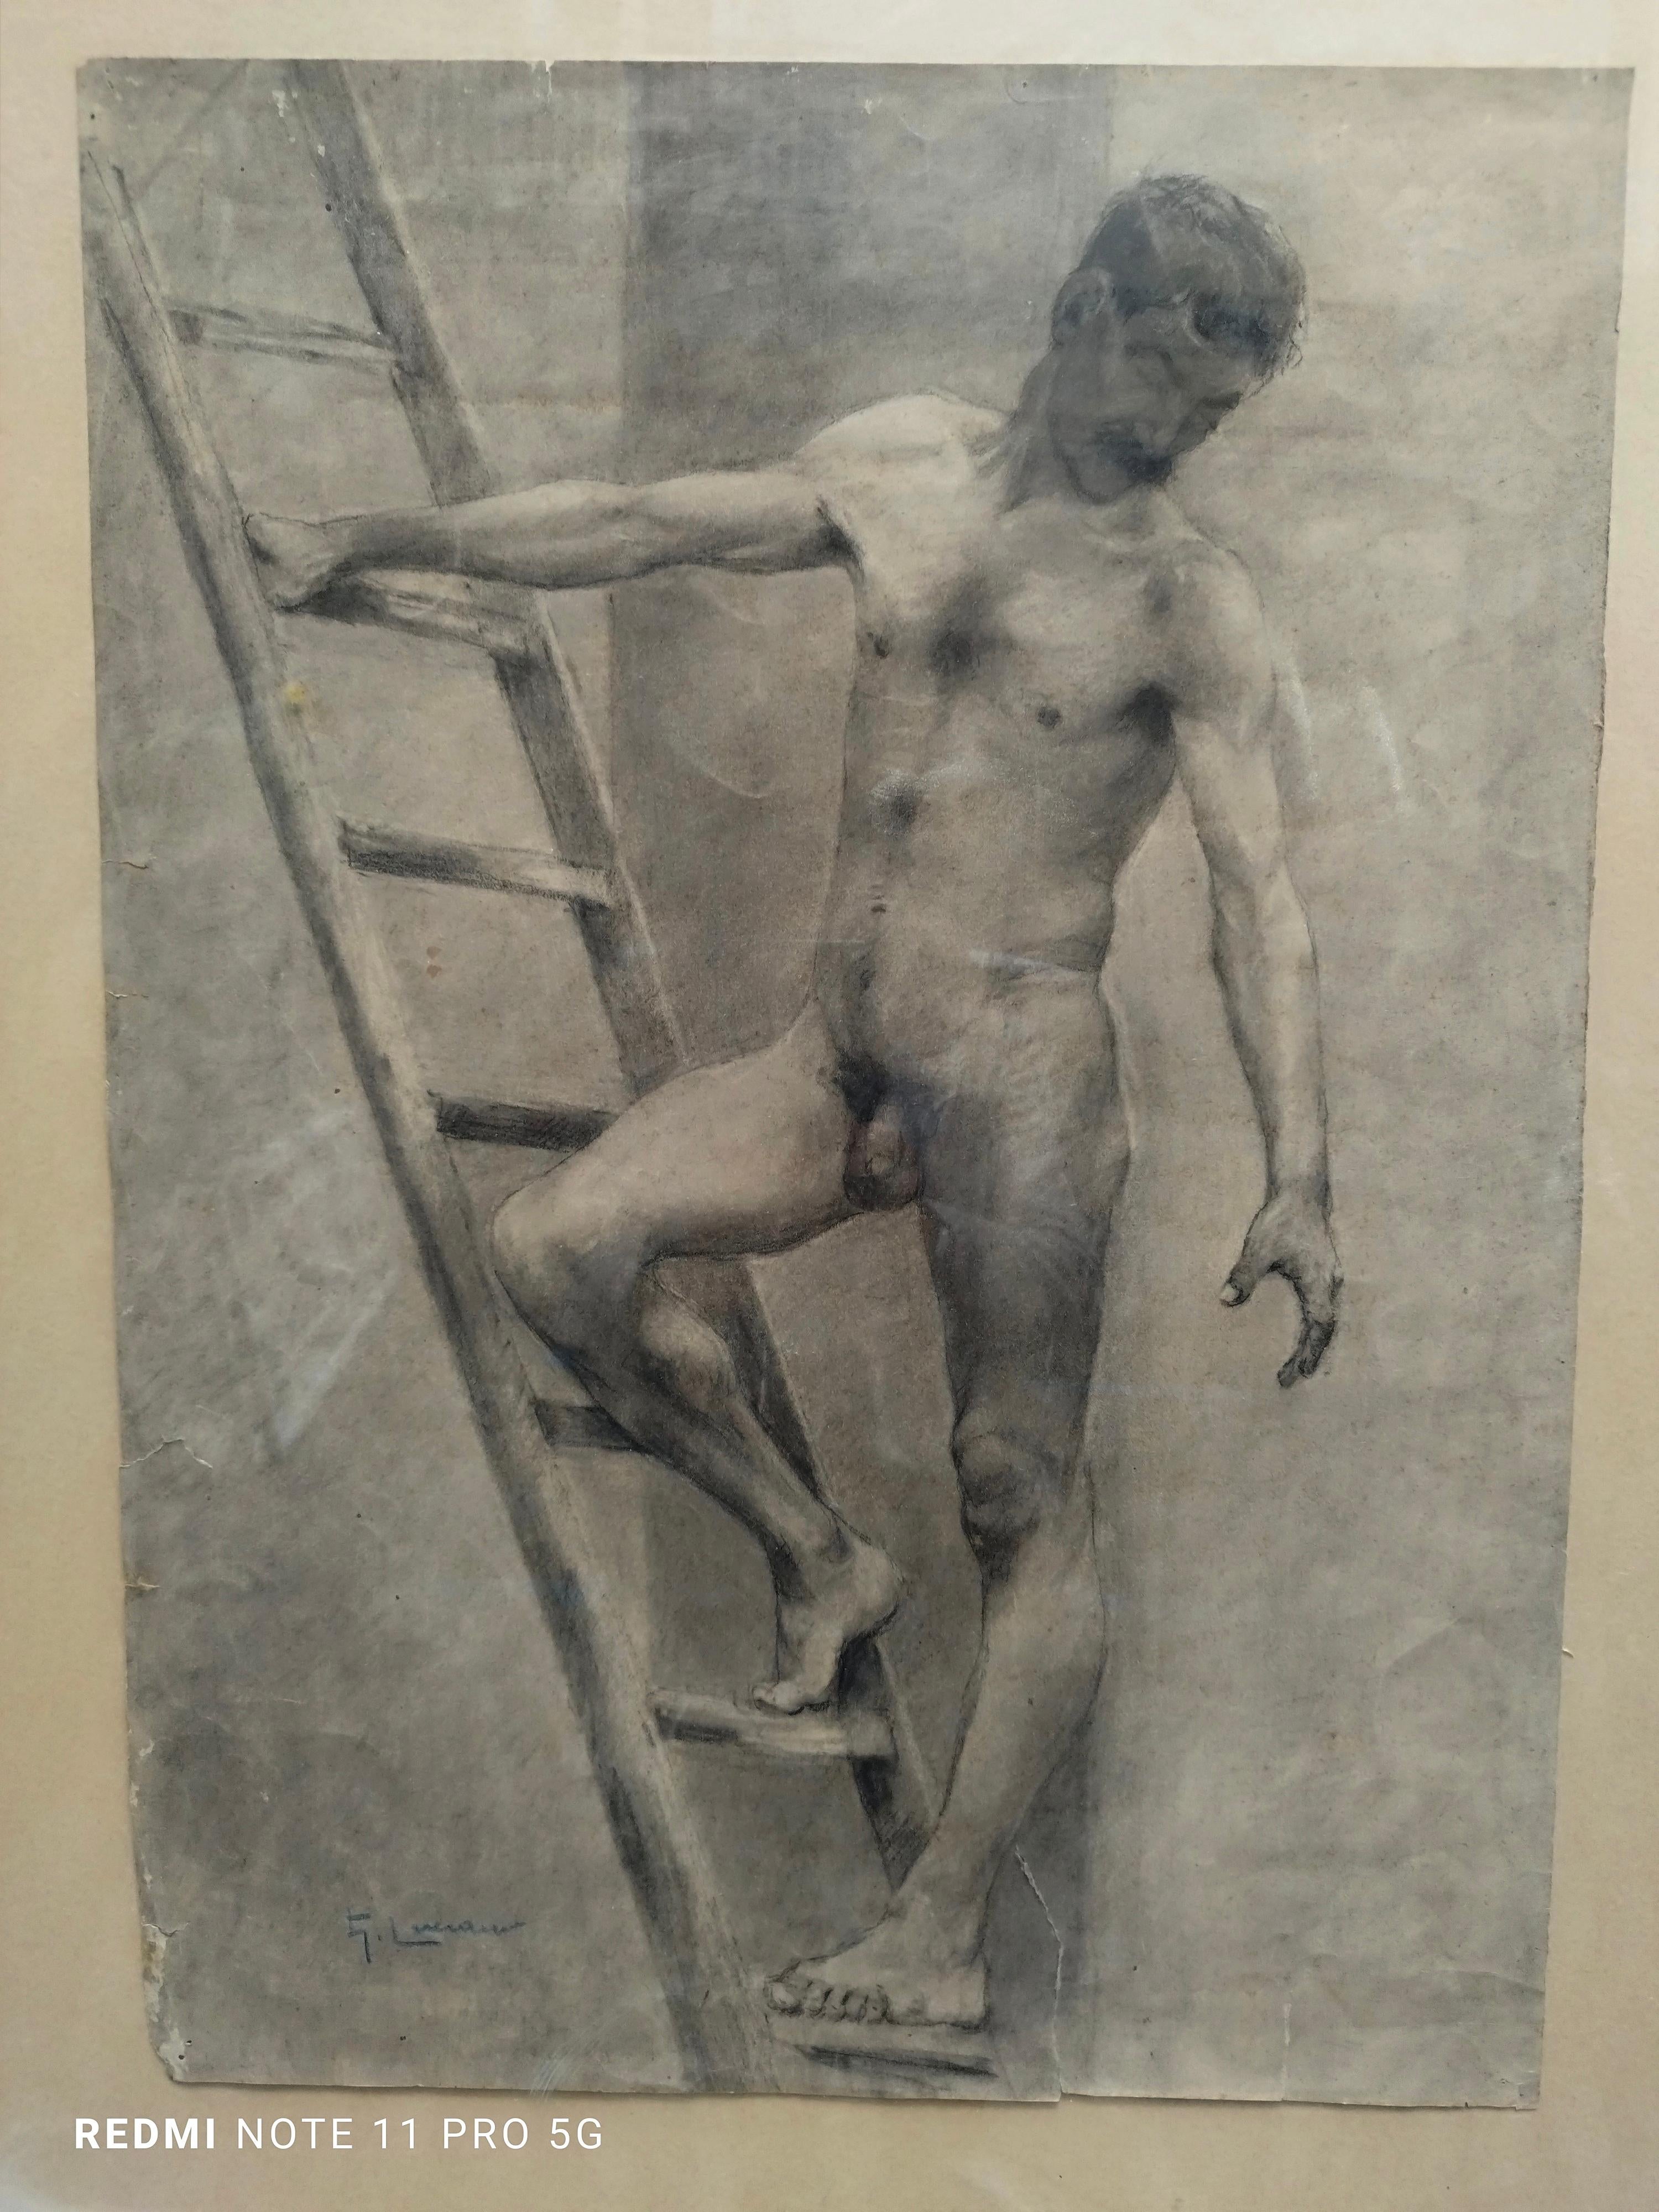 DRAWING OF ACKED MAN ON LADDER - Painting de Gennaro Luciano